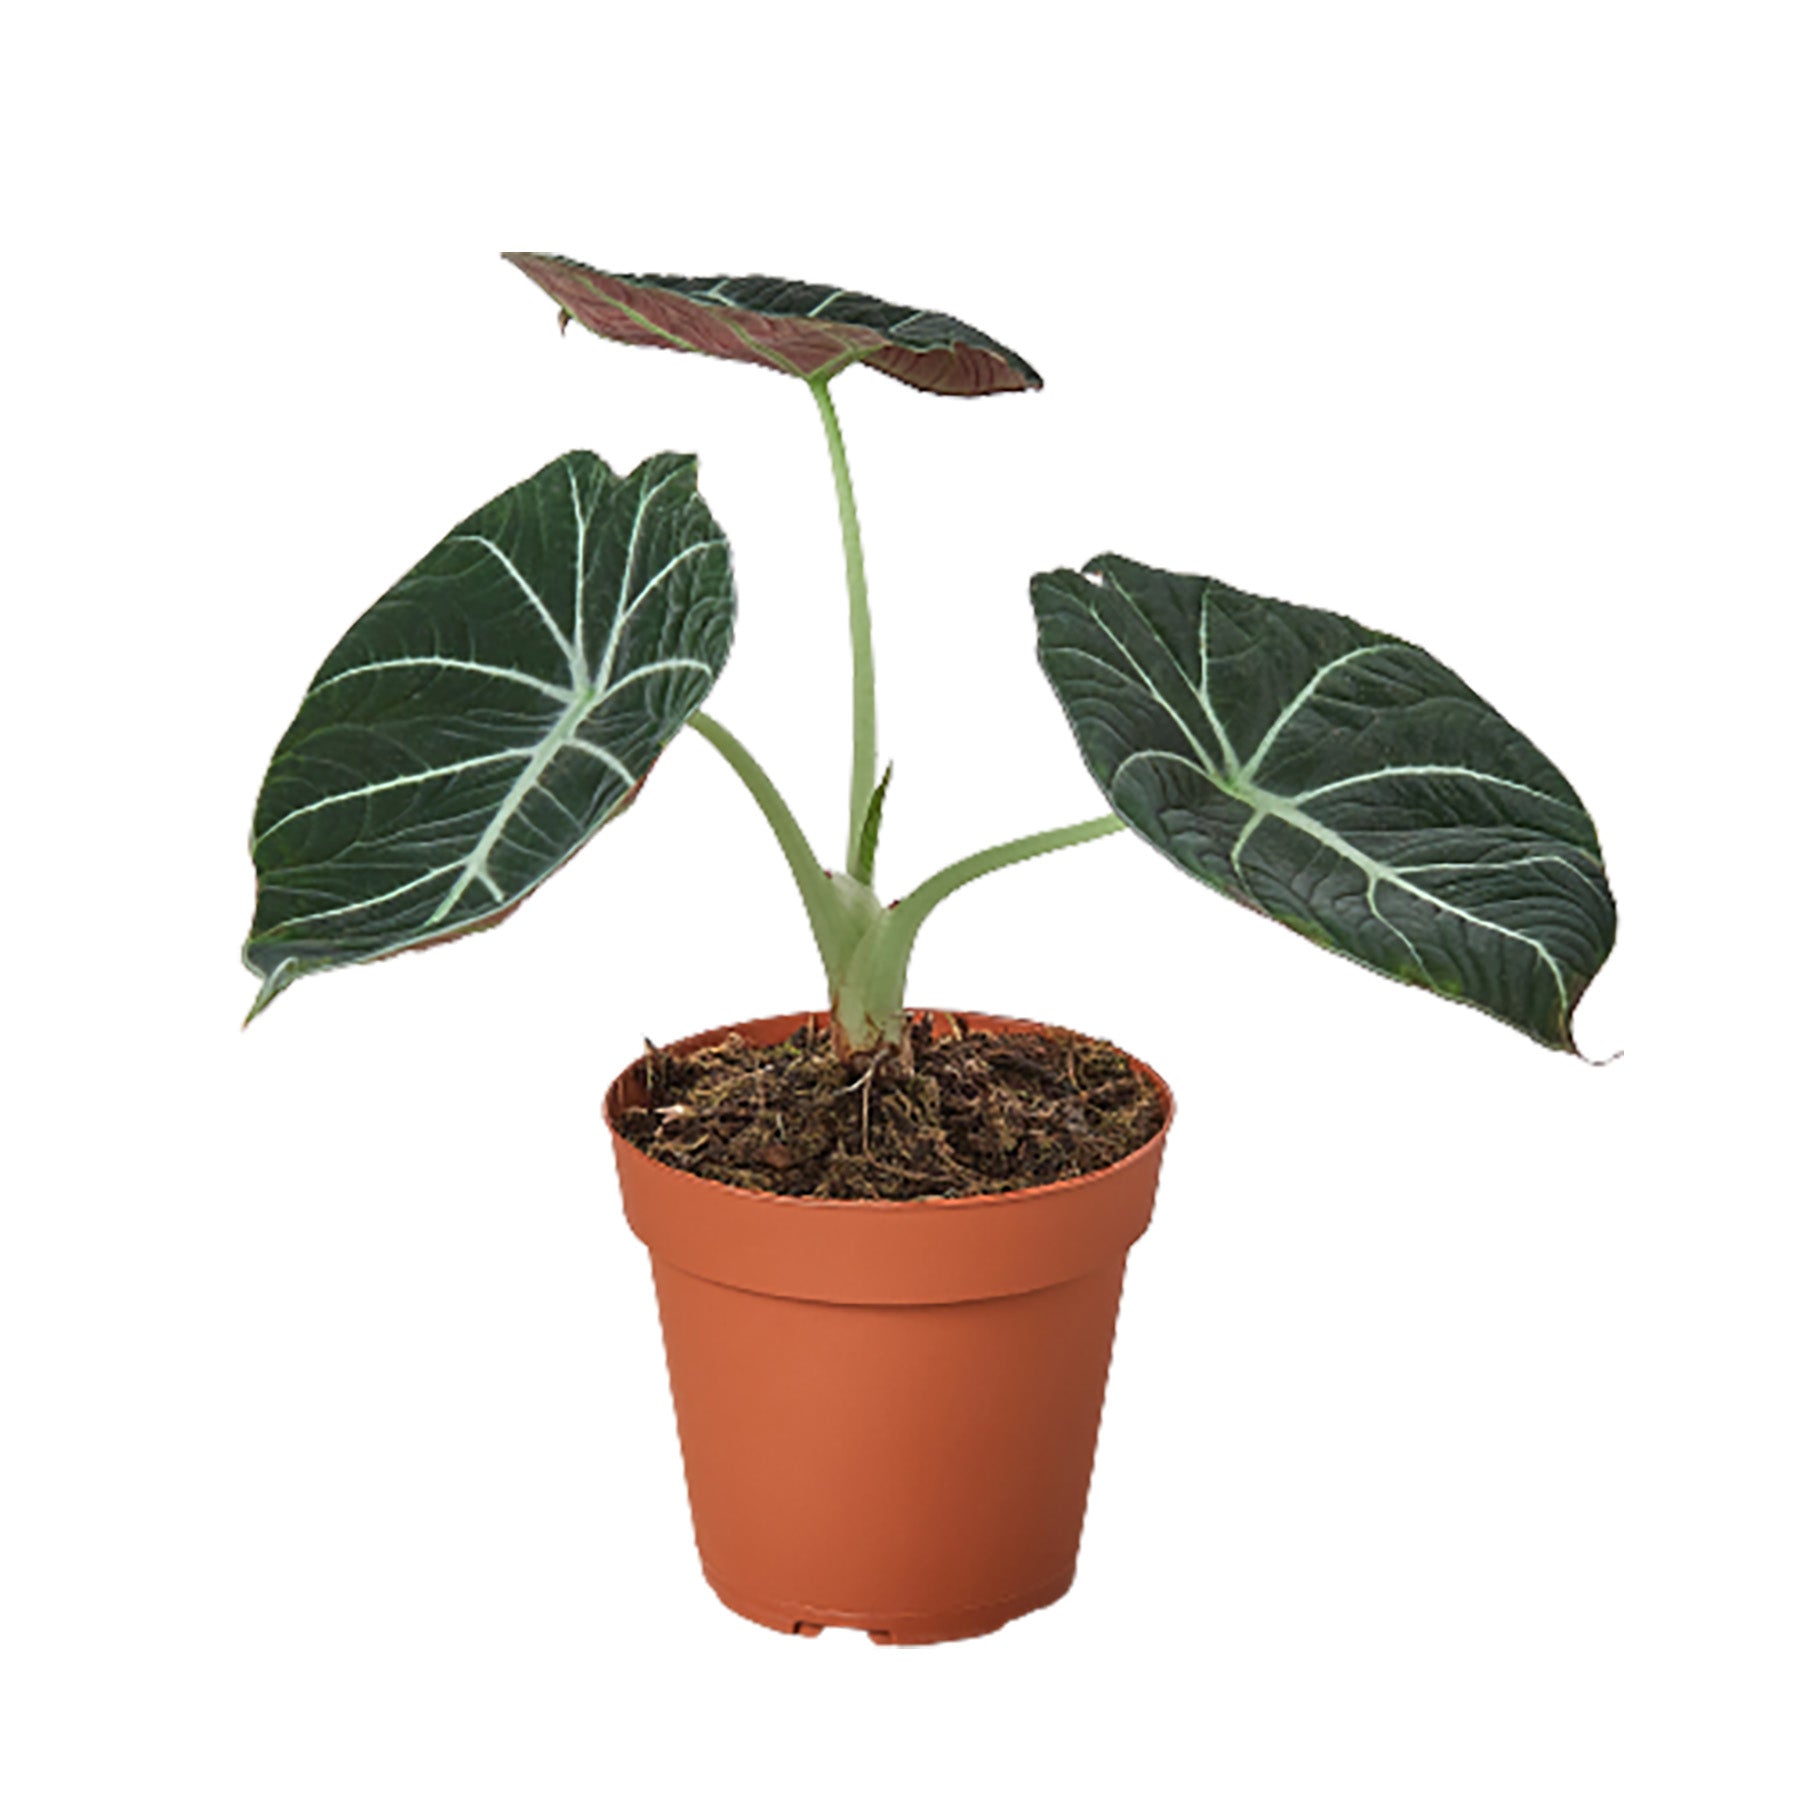 Alocasia black velvet is one of our favorites- it has extremely dark green leaves, with a soft texture.